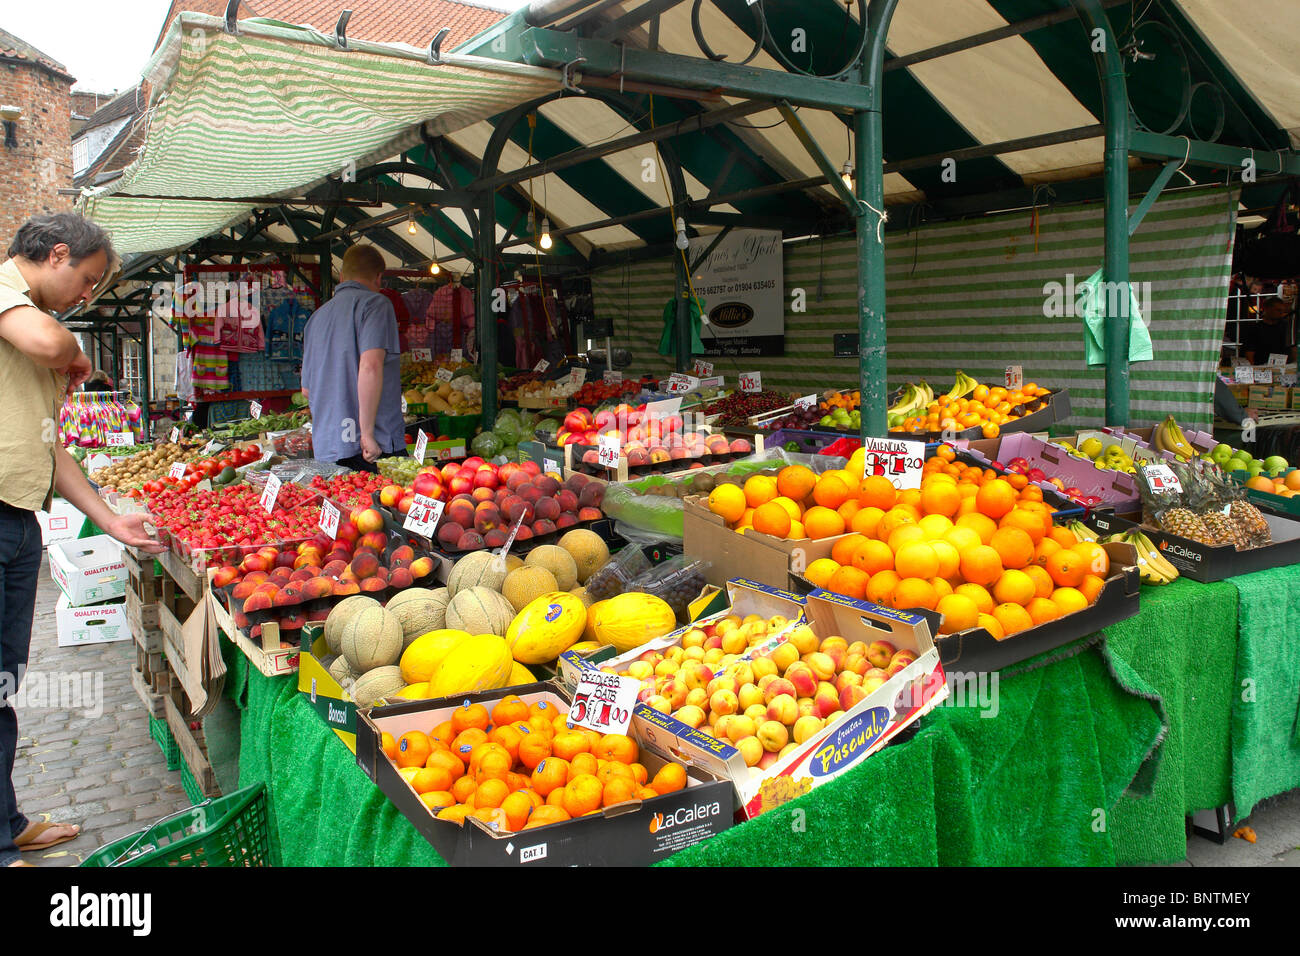 Fruit and vegetable stall in York market, Yorkshire Stock Photo